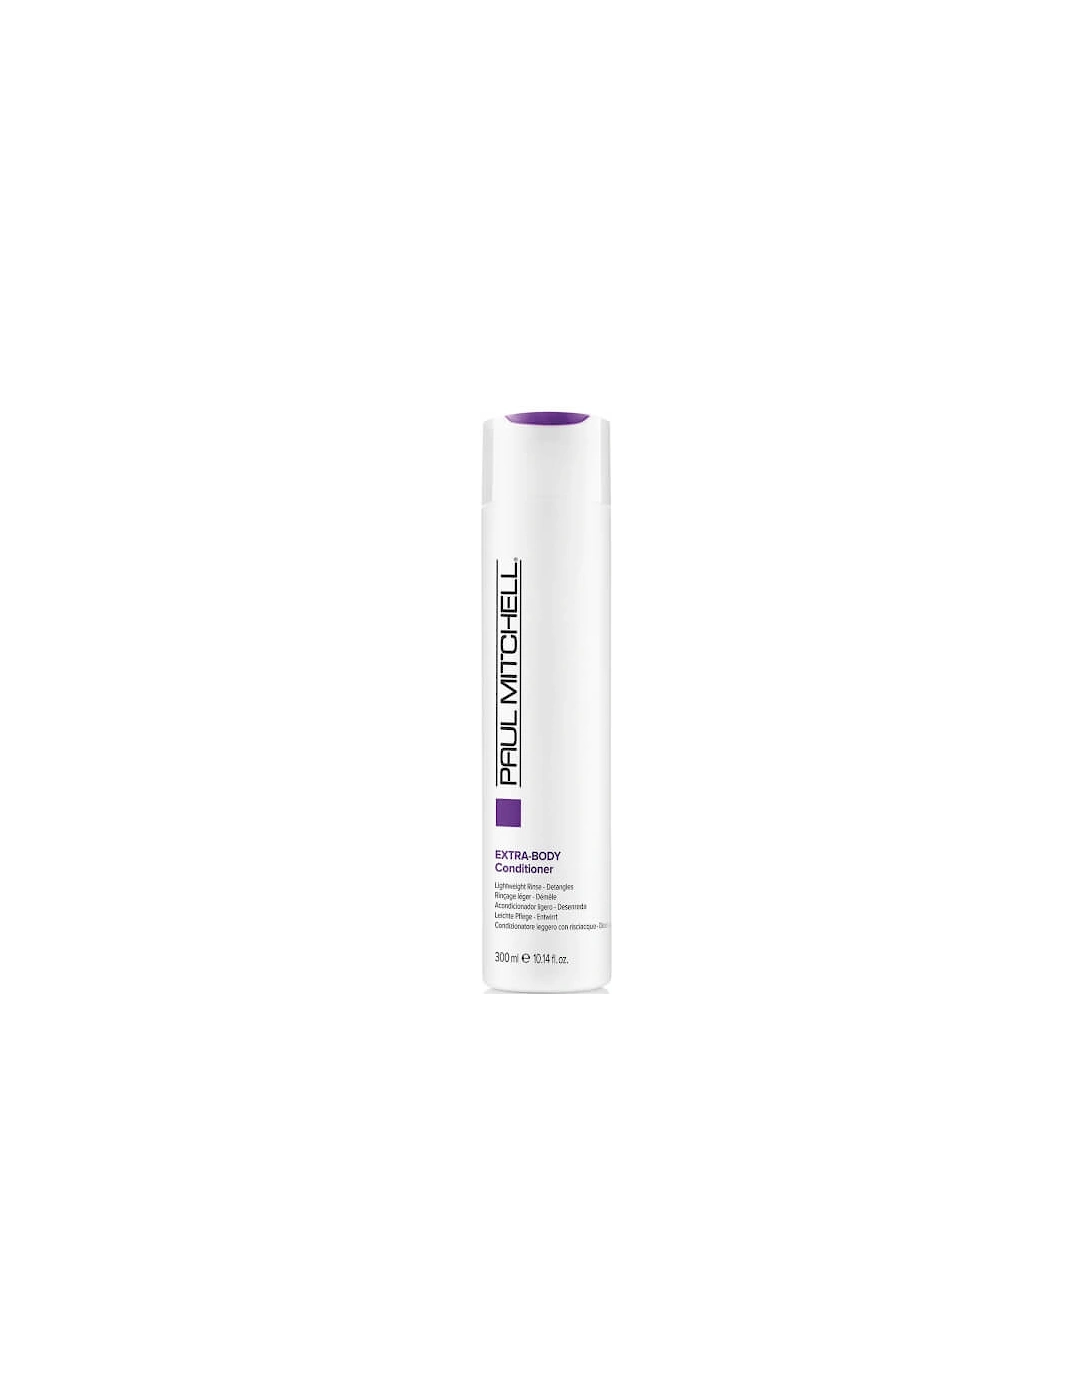 Exra Body Conditioner 300ml - Paul Mitchell, 2 of 1